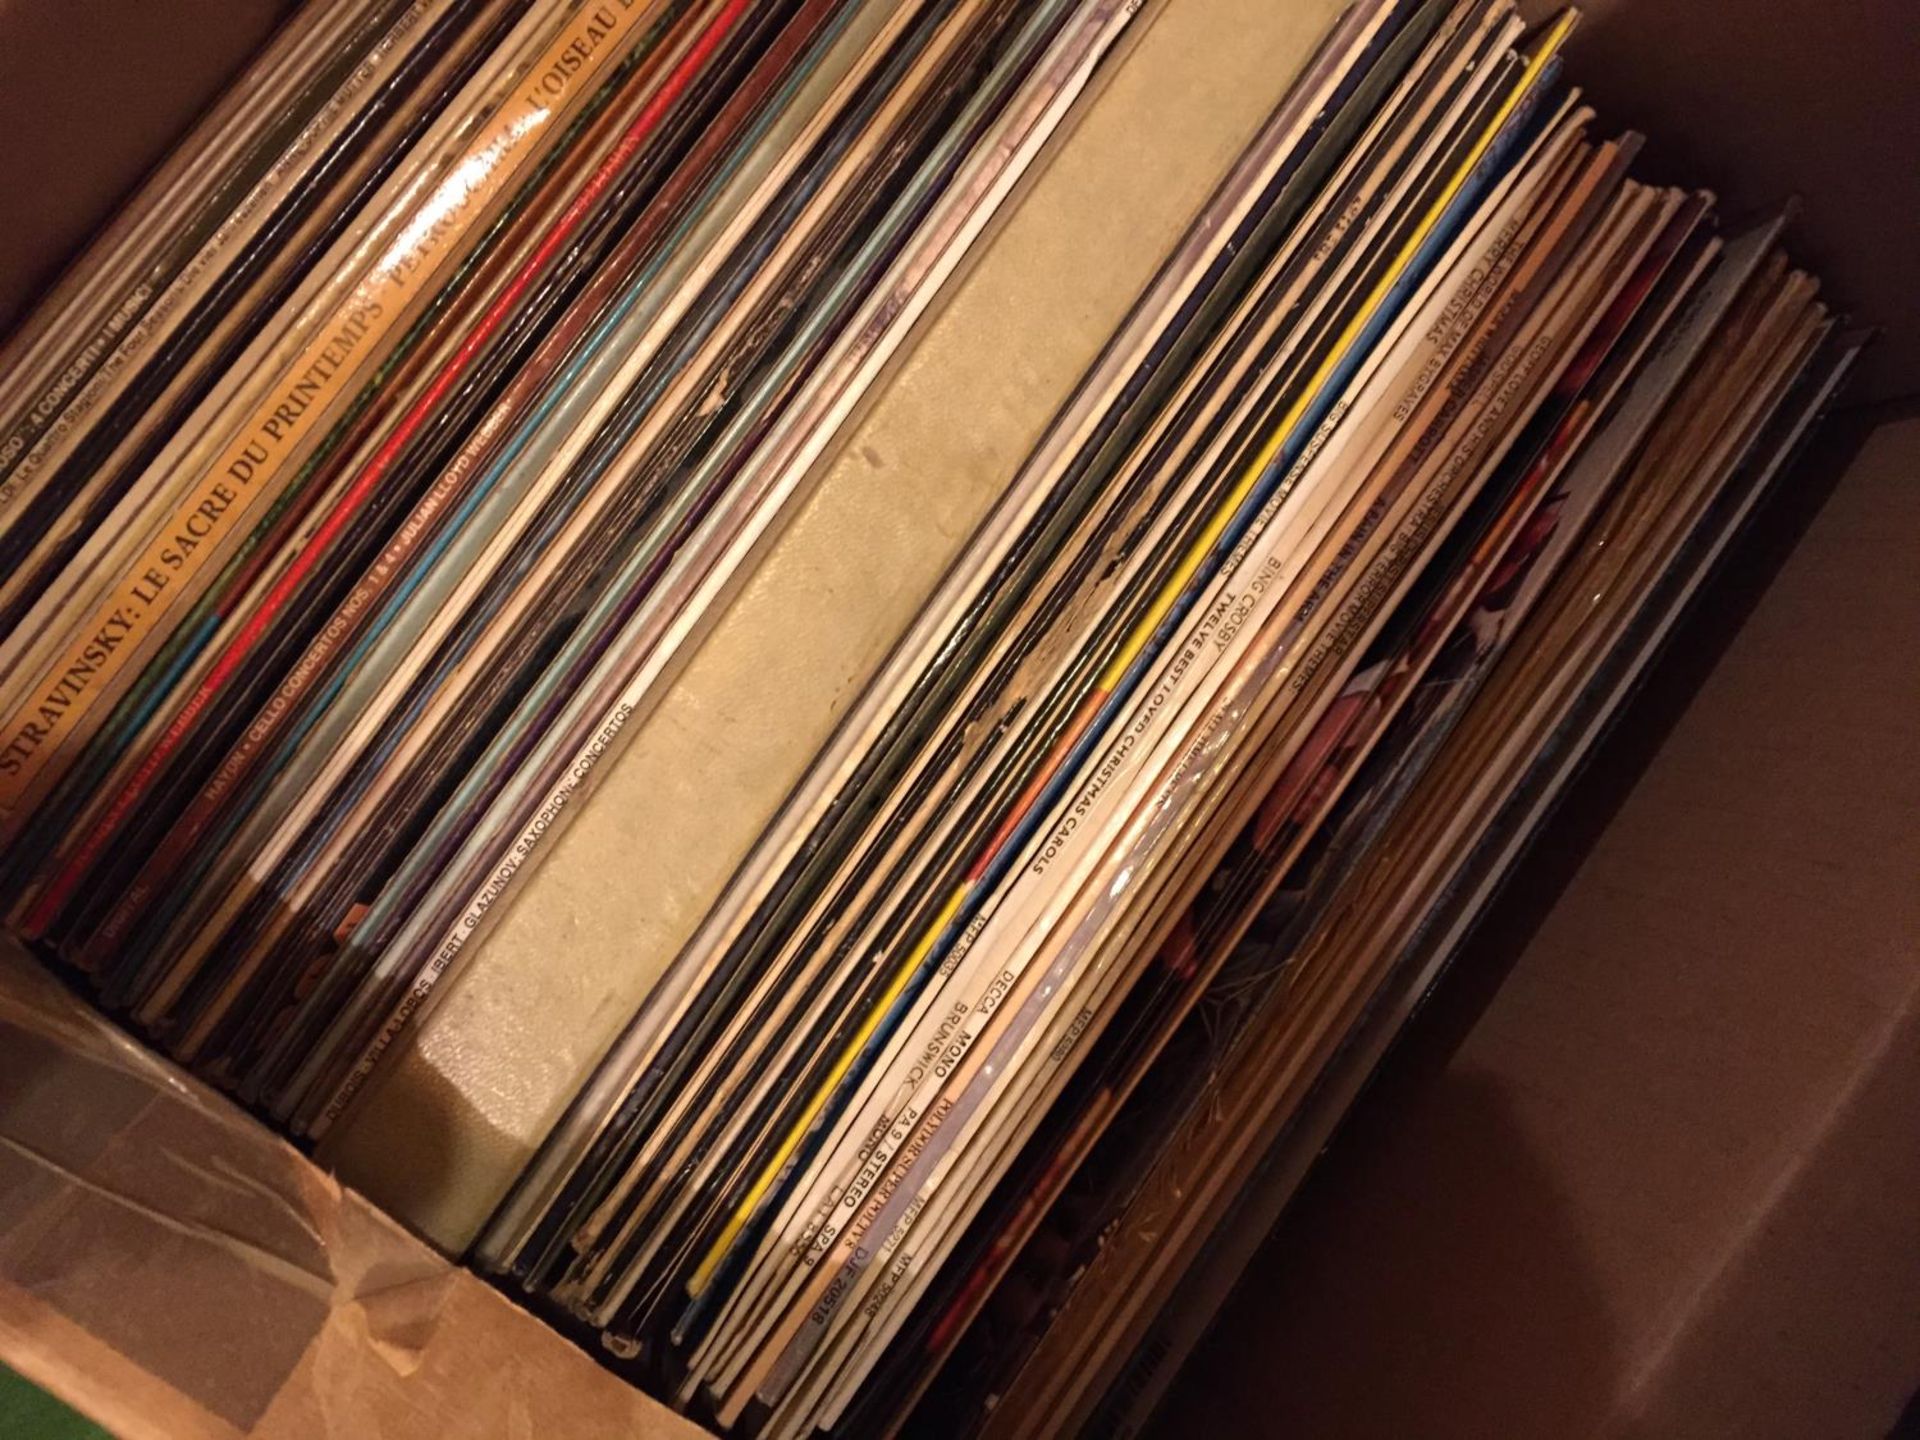 A LARGE BOX OF LP RECORDS AND A BLUE STORAGE BOX ALSO CONTAINING LP'S TO INCLUDE SINATRA, BING - Image 2 of 3